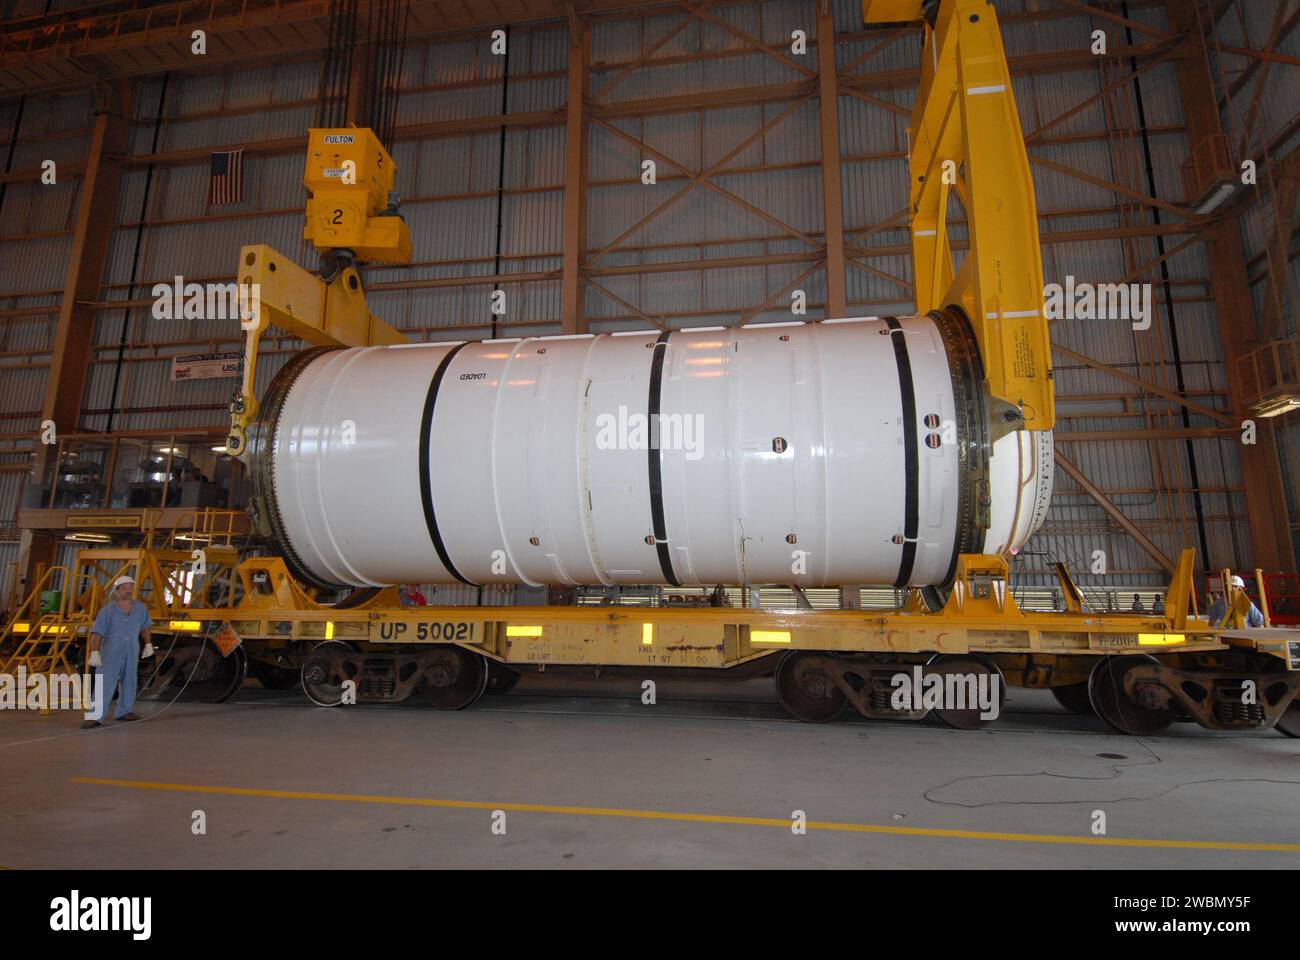 CAPE CANAVERAL, Fla. –  Cranes are attached to the first of the Ares I-X motor segments to raise and transfer it to a work stand in the Rotation, Processing and Surge Facility at NASA's Kennedy Space Center in Florida. Four segments were delivered to Kennedy for final processing and integration. The booster used for the Ares I-X launch is being modified by adding new forward structures and a fifth segment simulator. The motor is the final hardware needed for the rocket's upcoming test flight this summer. The stacking operations are scheduled to begin in the Vehicle Assembly Building in April. Stock Photo